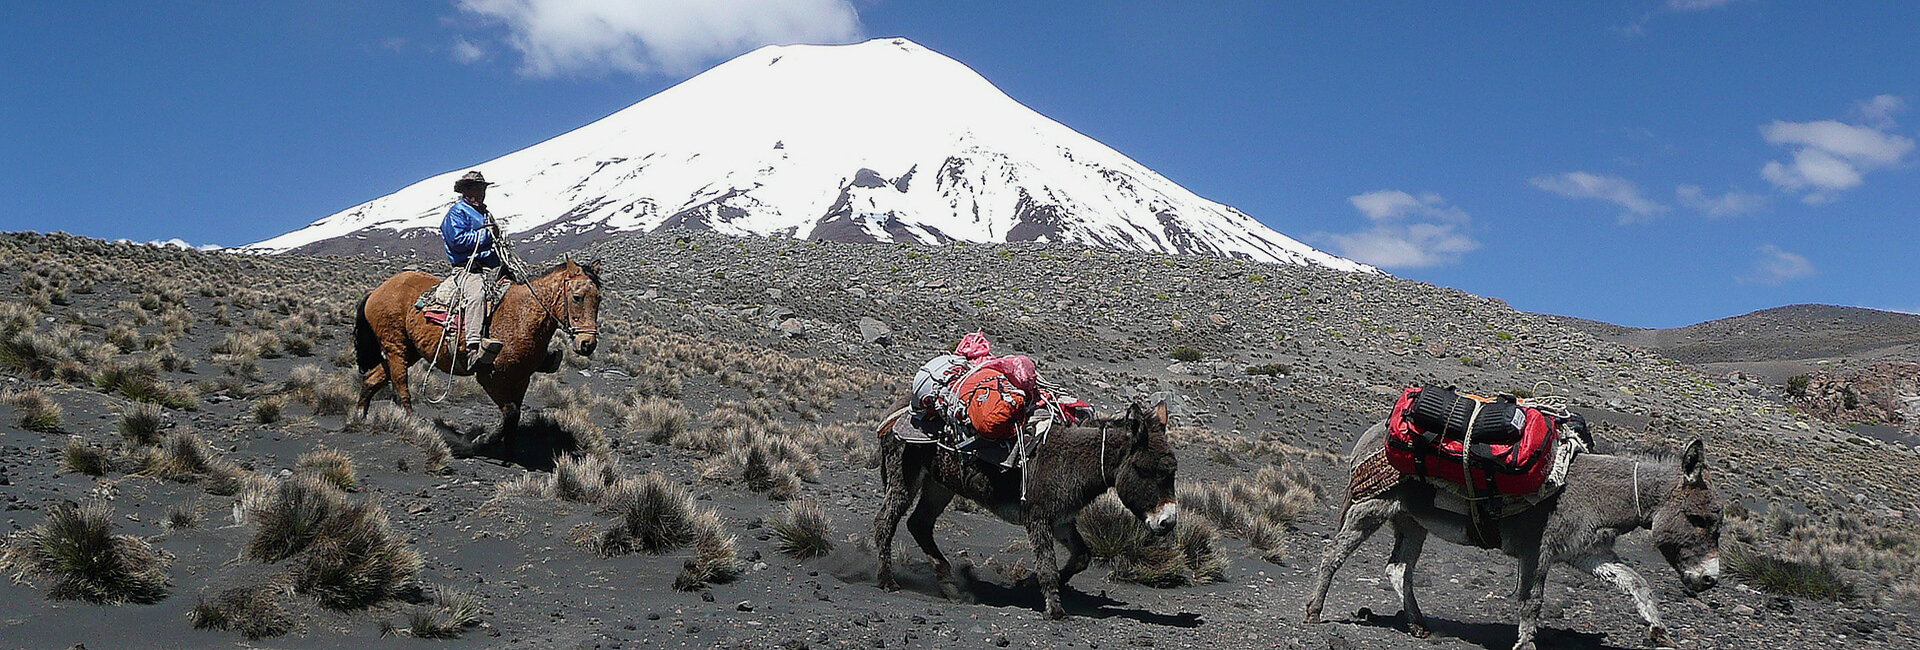 Mules on the way to Base Camp Volcano Parinacota